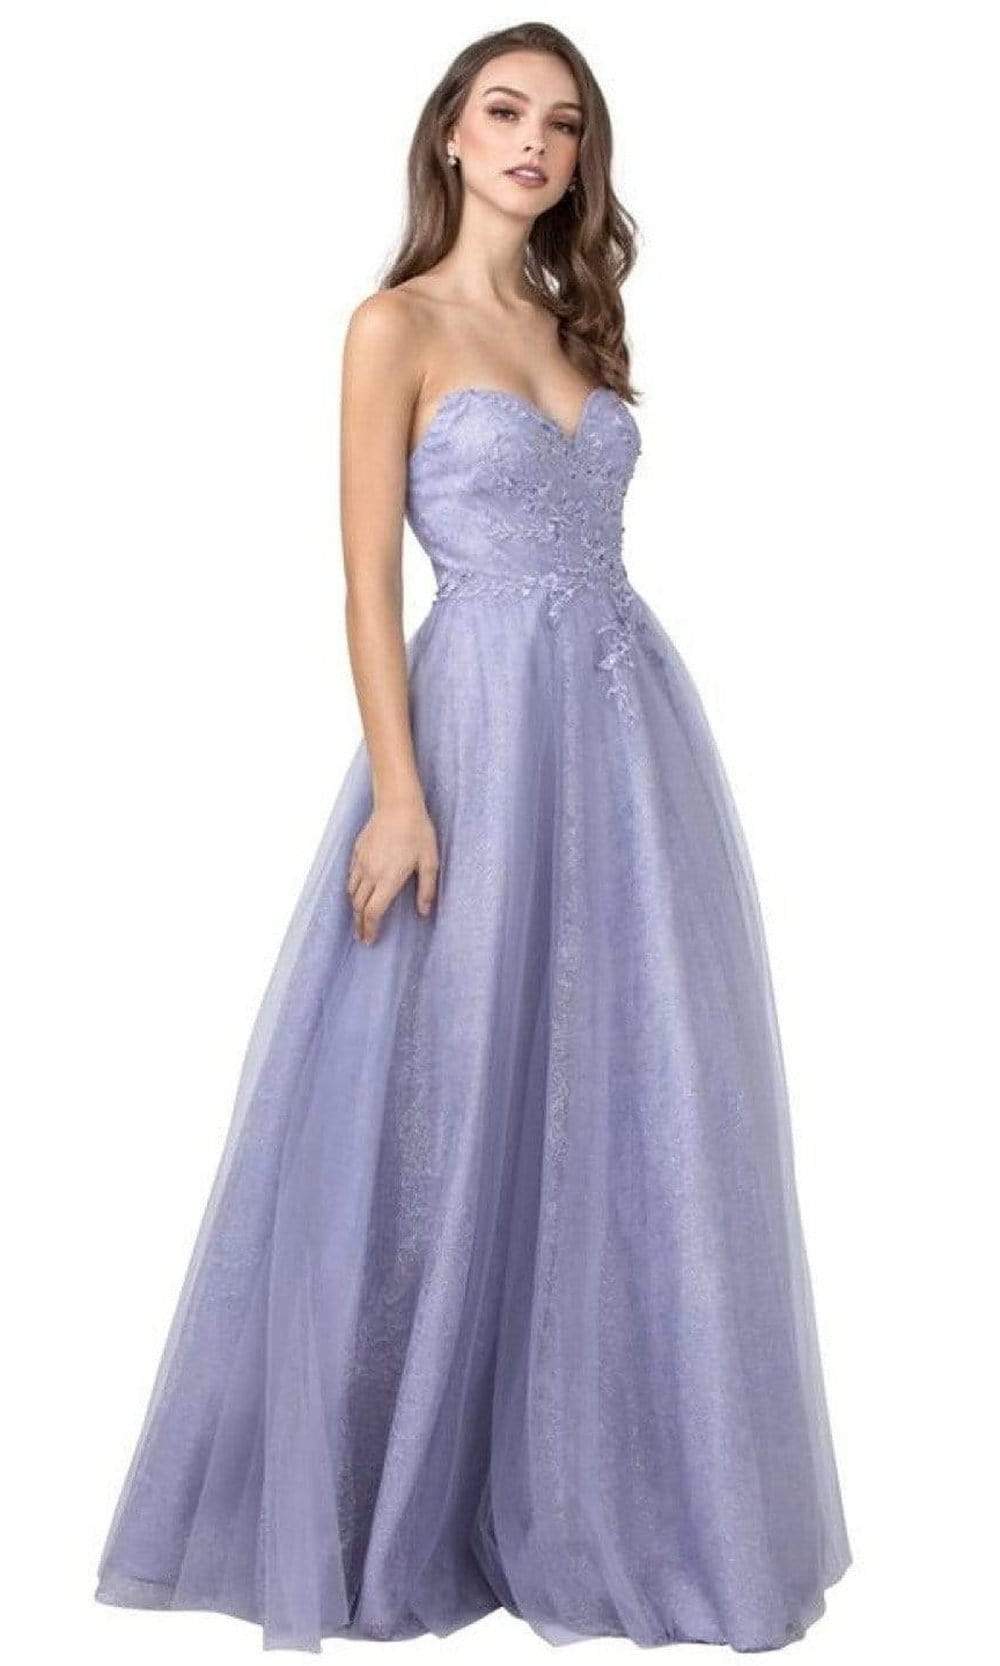 Aspeed Design - L2433 Sweetheart Embroidered A-Line Dress Prom Dresses XXS / Pewter